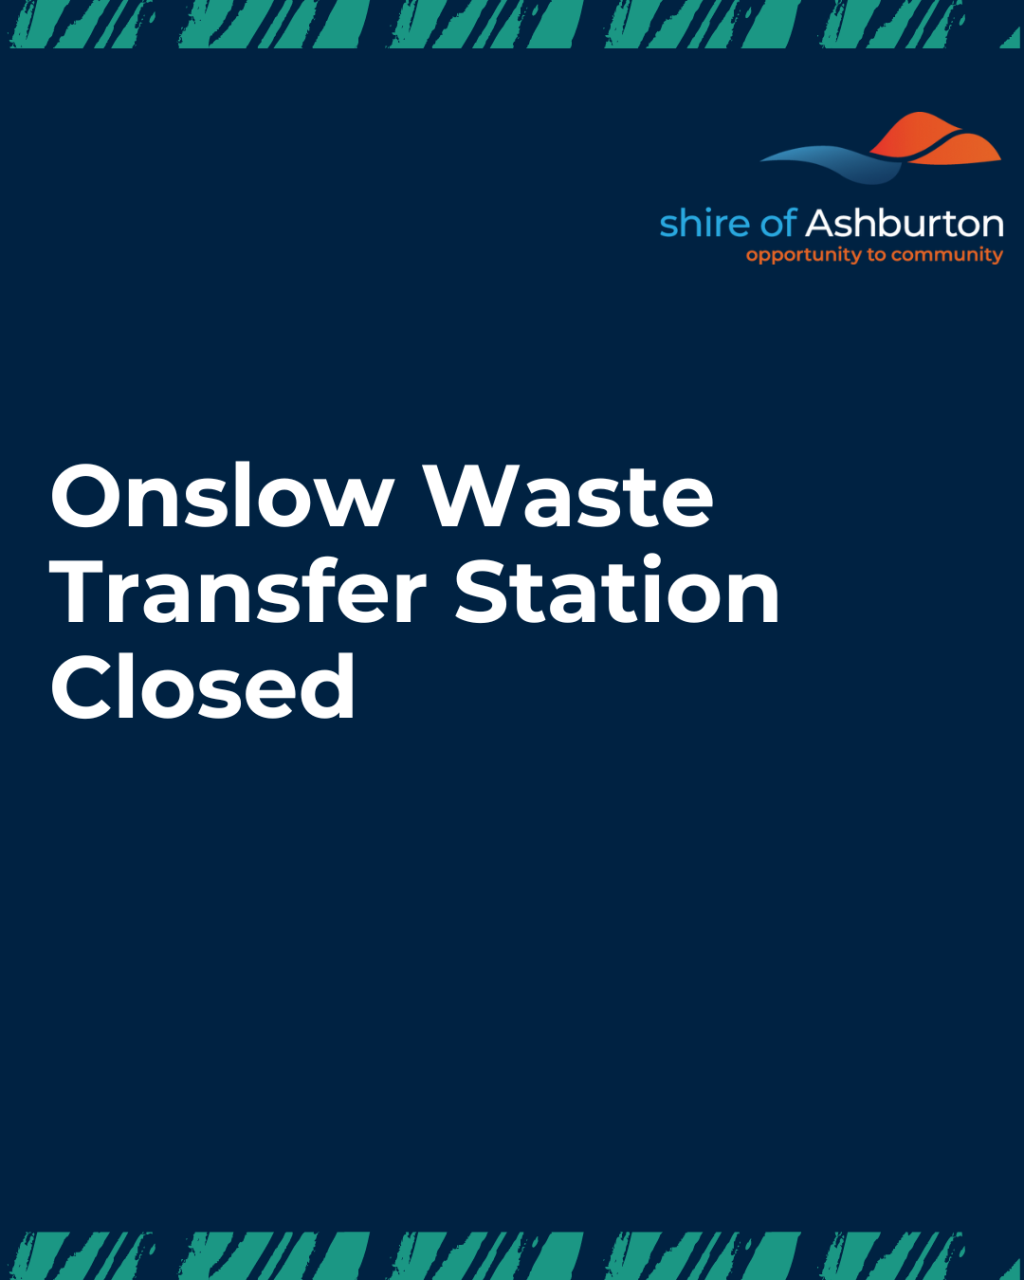 Onslow Waste Transfer Station Closed